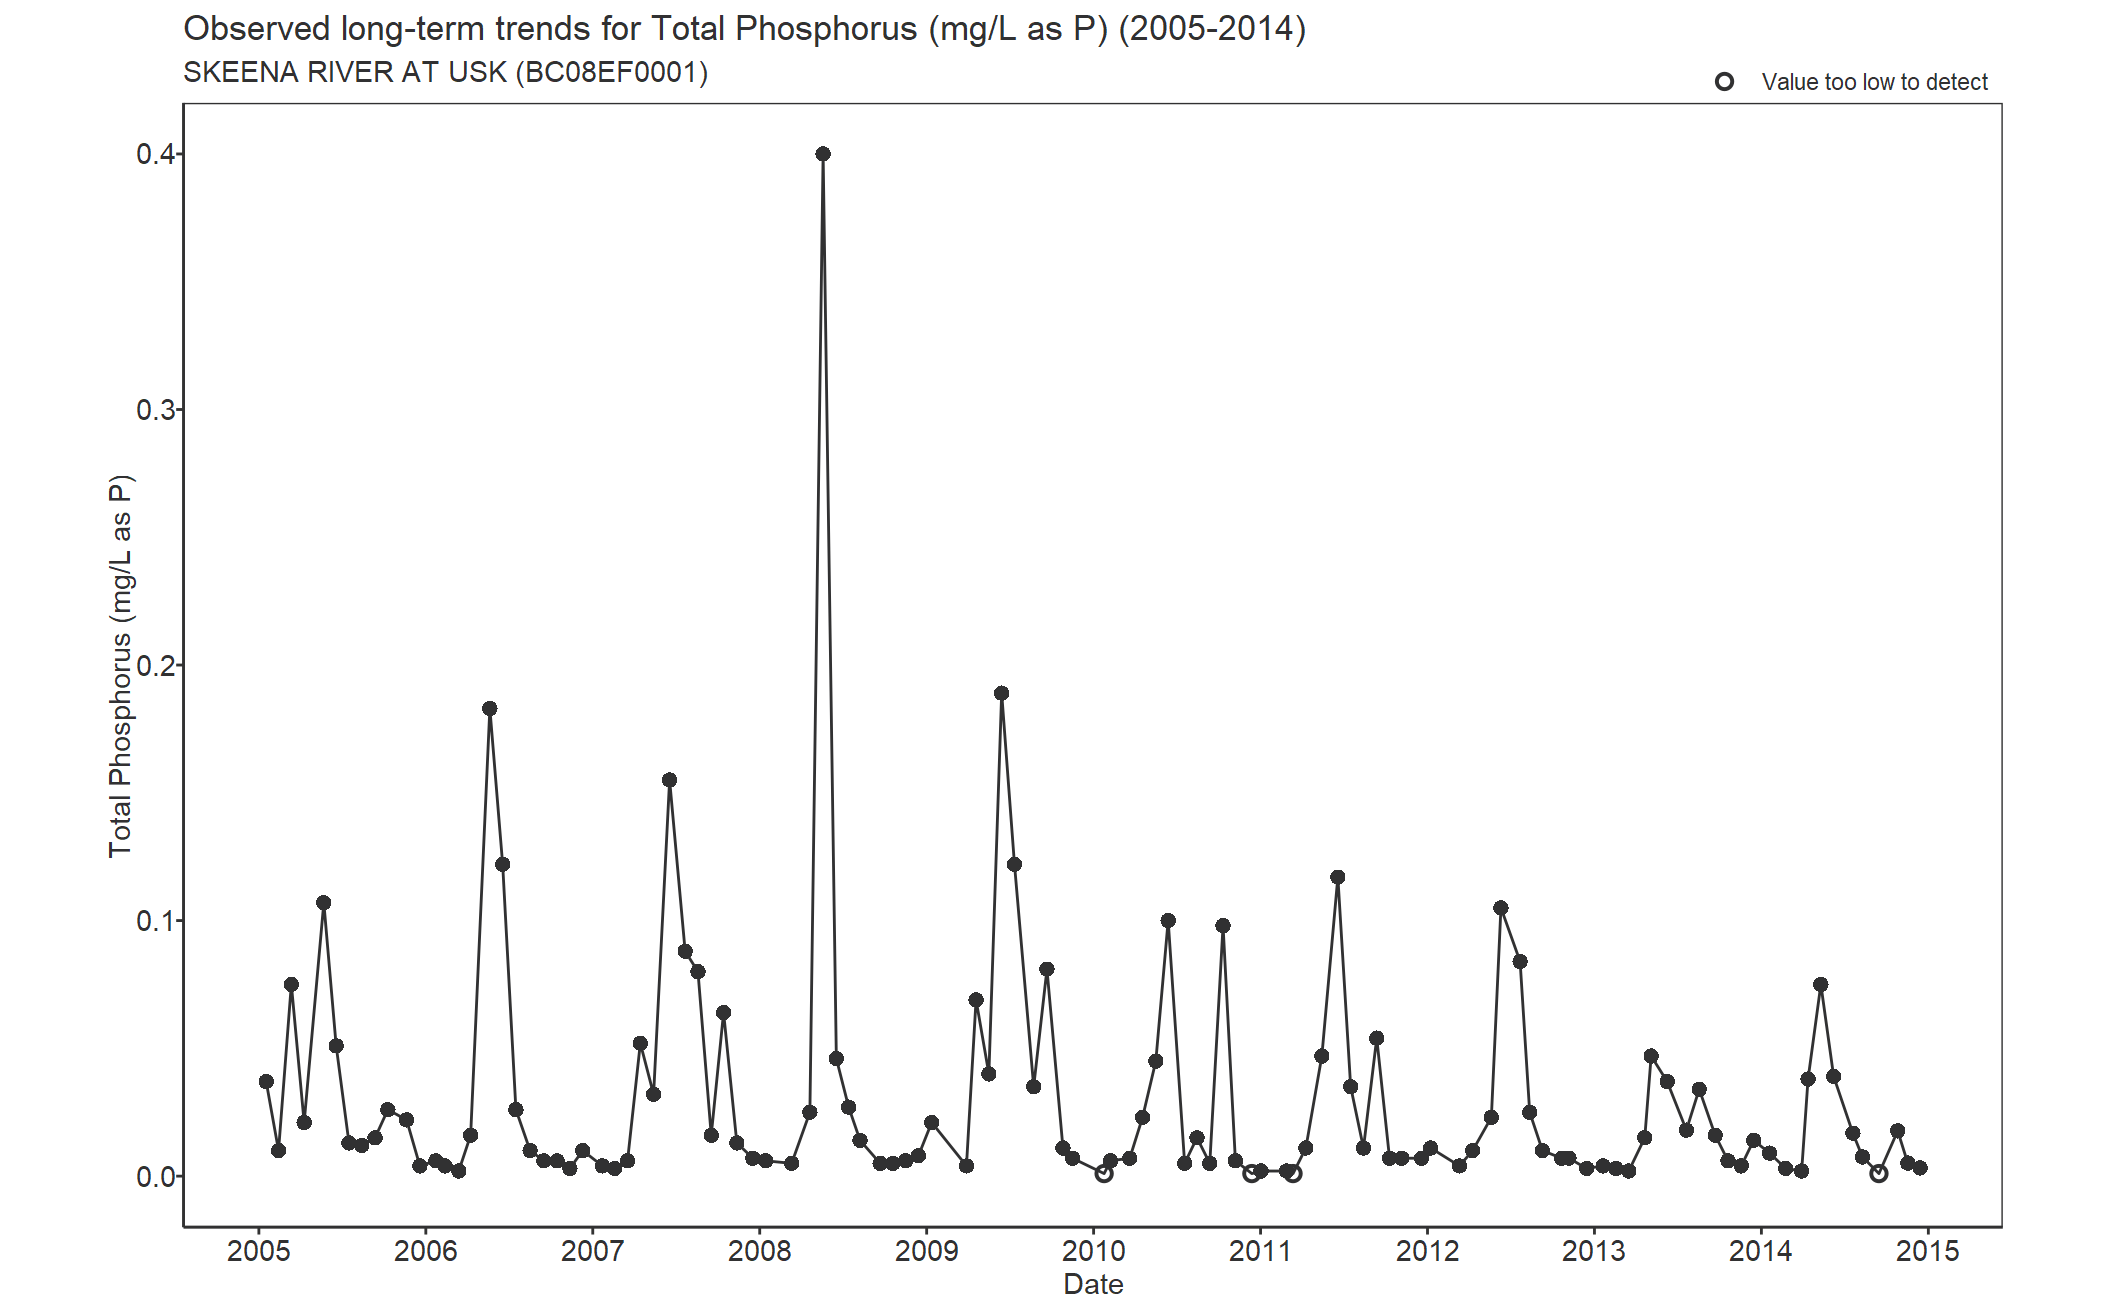 Observed long-term trends for Total Phosphorus (2005-2014)